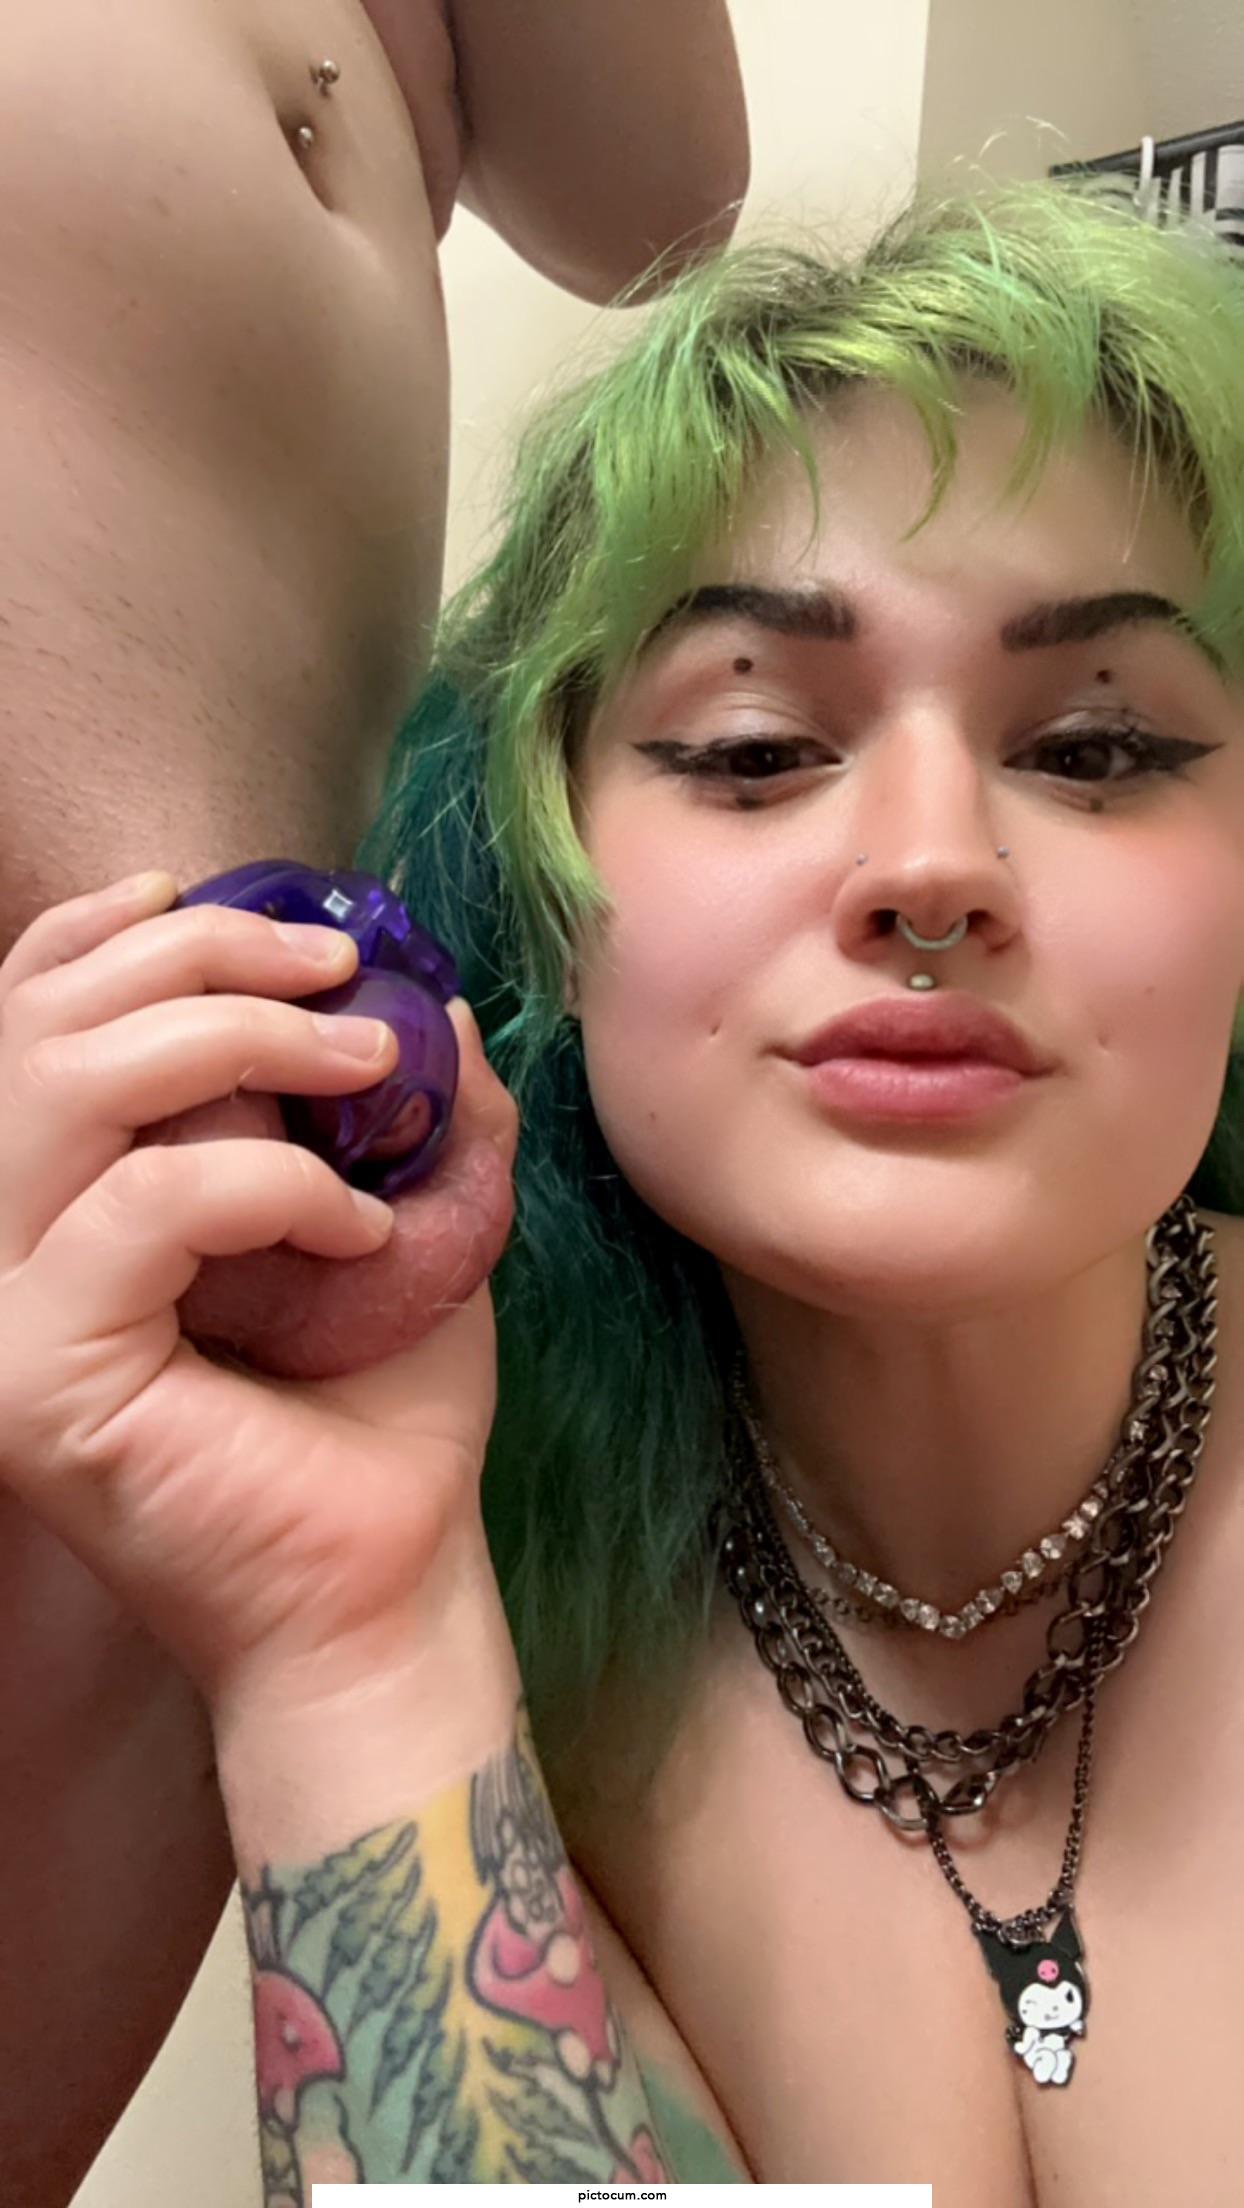 There’s a cock in my other hand and my sissy is leaking all over, I watched them melt as my alpha fucked me on repeat. You’re so pathetic you wish you were in that position